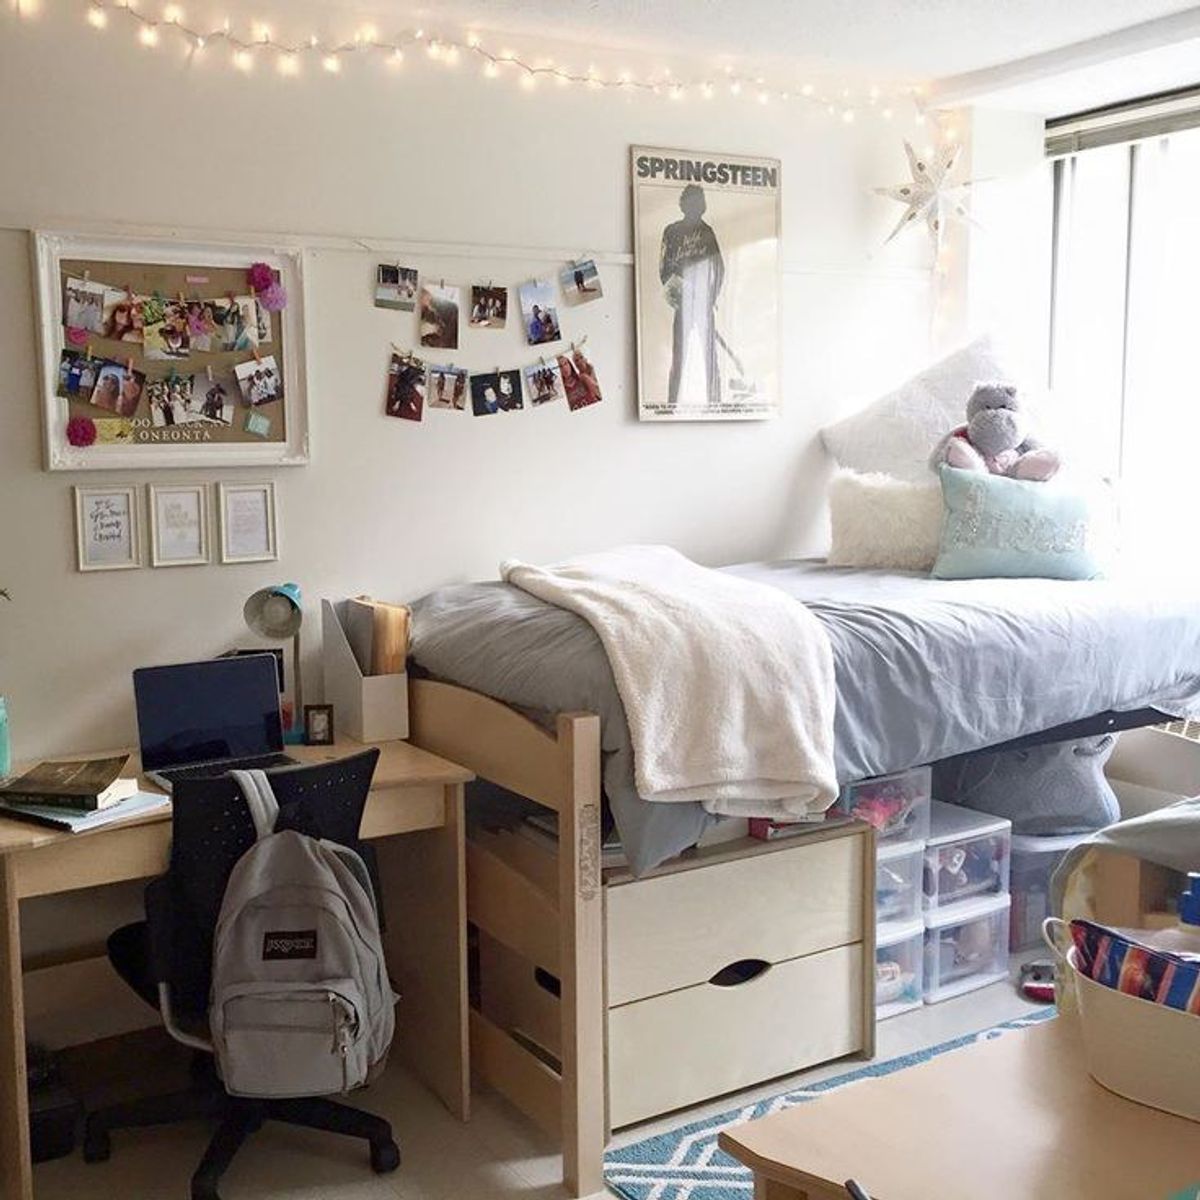 5 Ways To Help Make Your College Dorm Feel Like Home